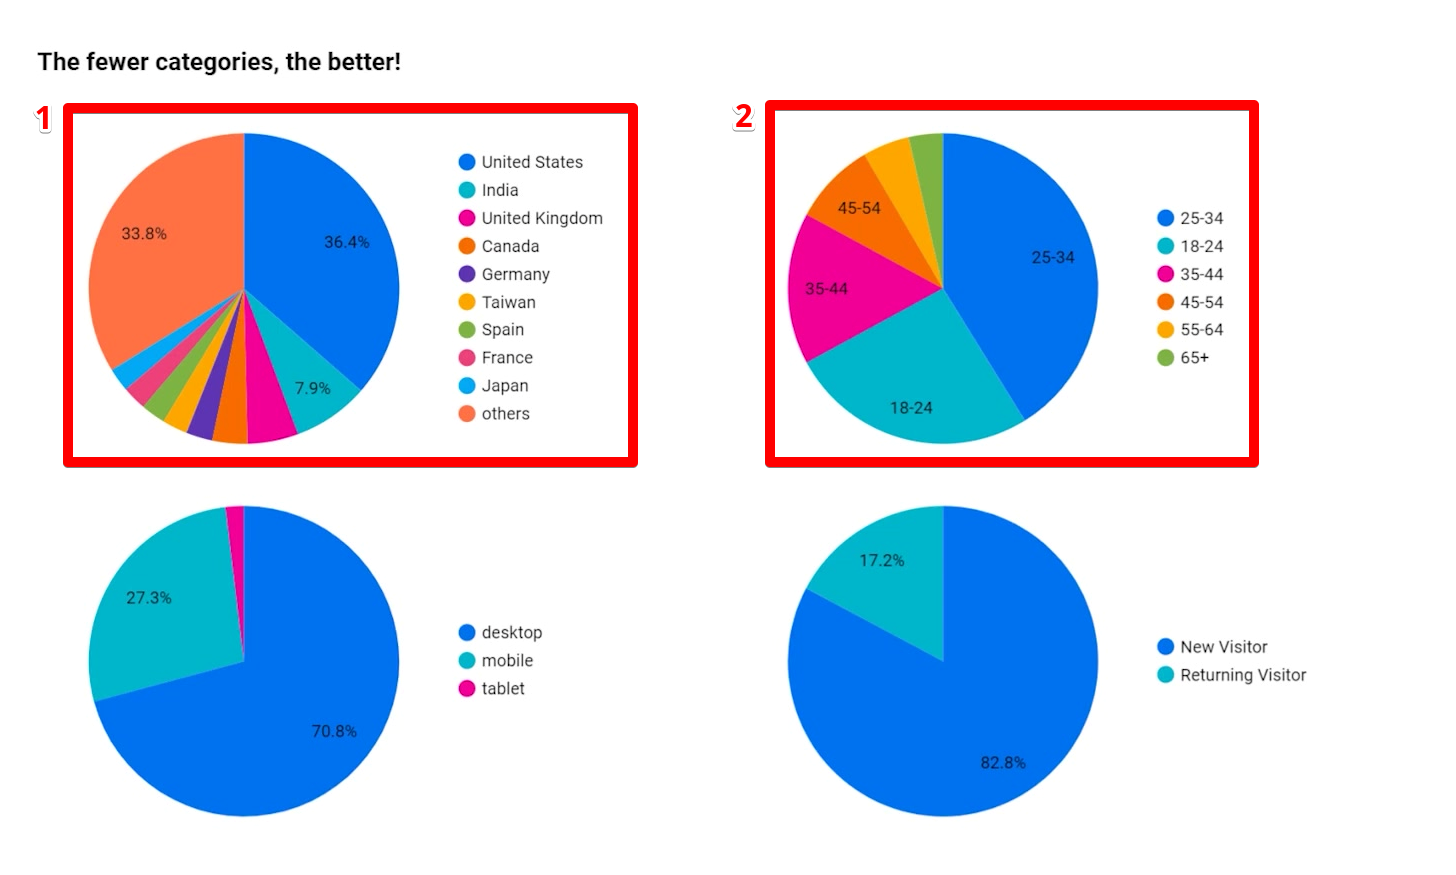 Analyzing pie chart as a medium to access data in a report in GDS